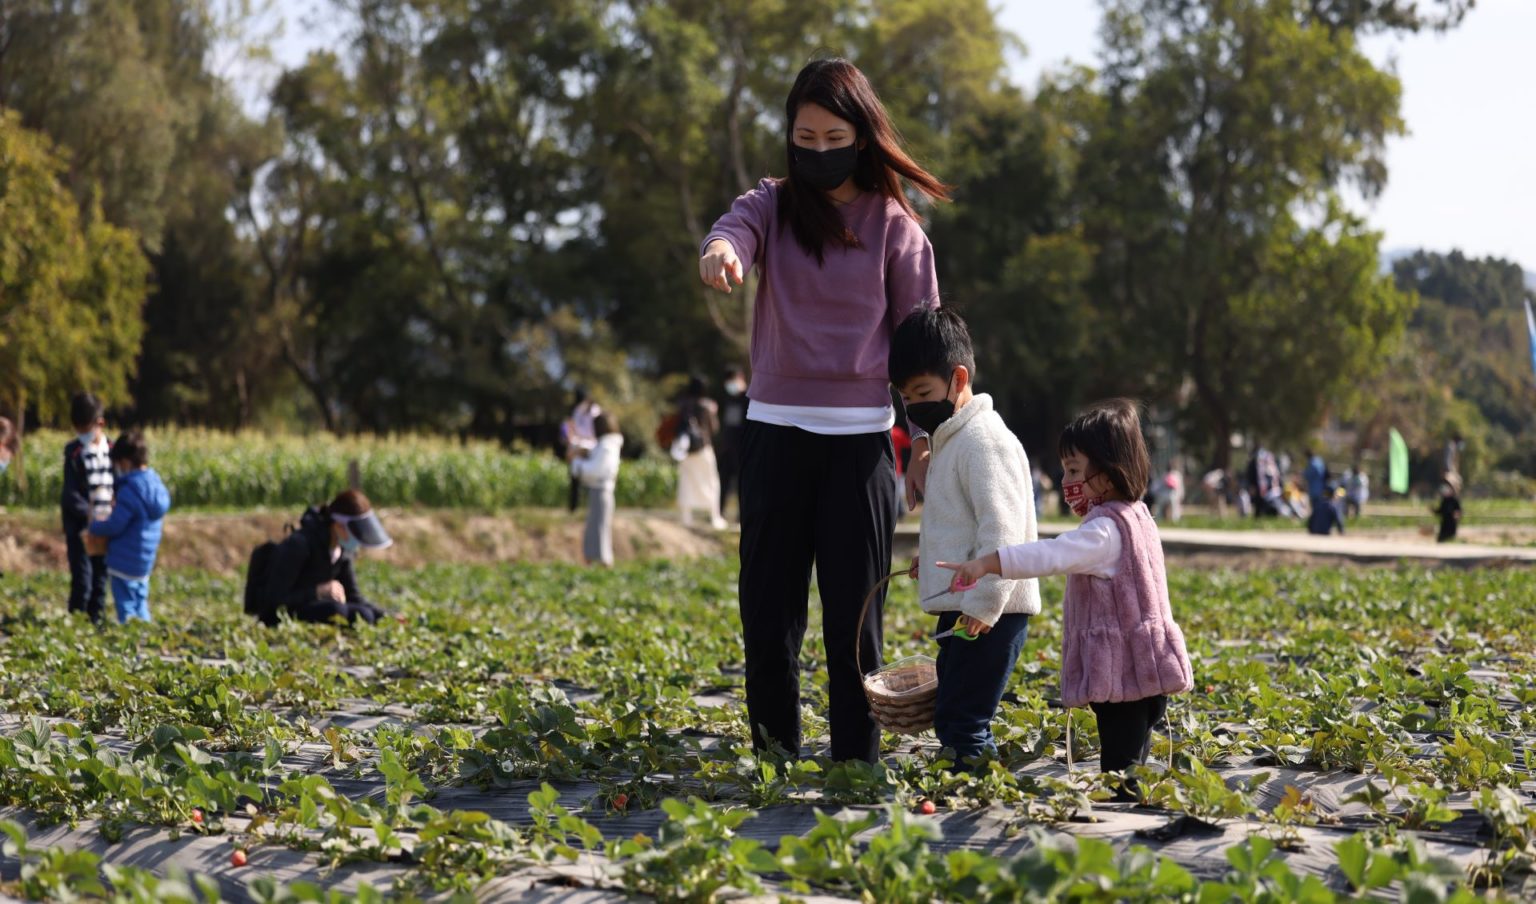 A family comprising a mother, son and daughter in the middle of the strawberry fields at Kam Tin Country Park.